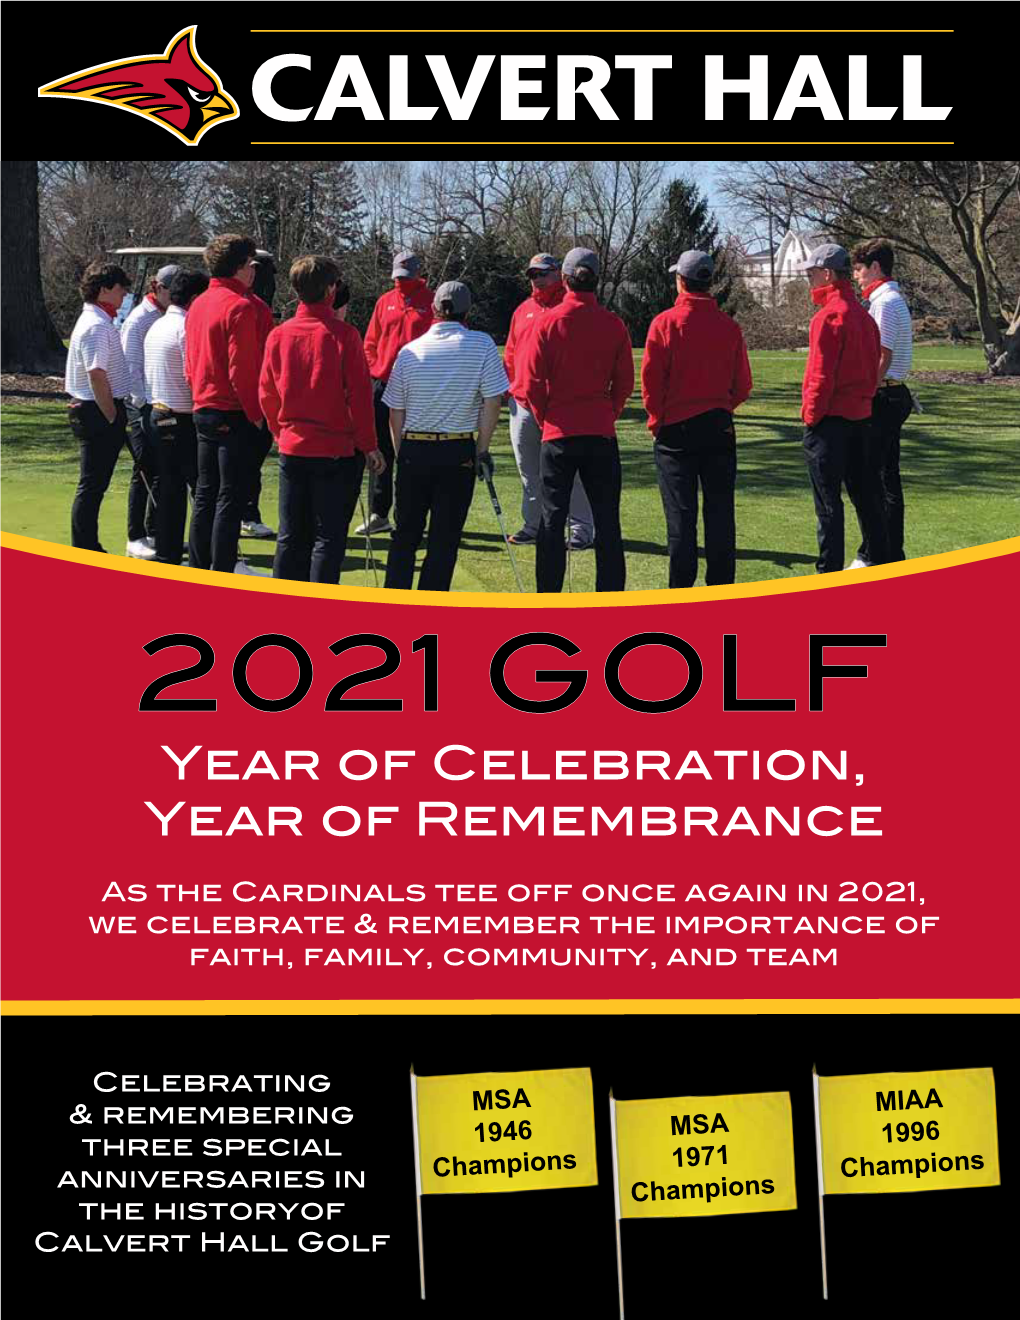 2021 GOLF Year of Celebration, Year of Remembrance